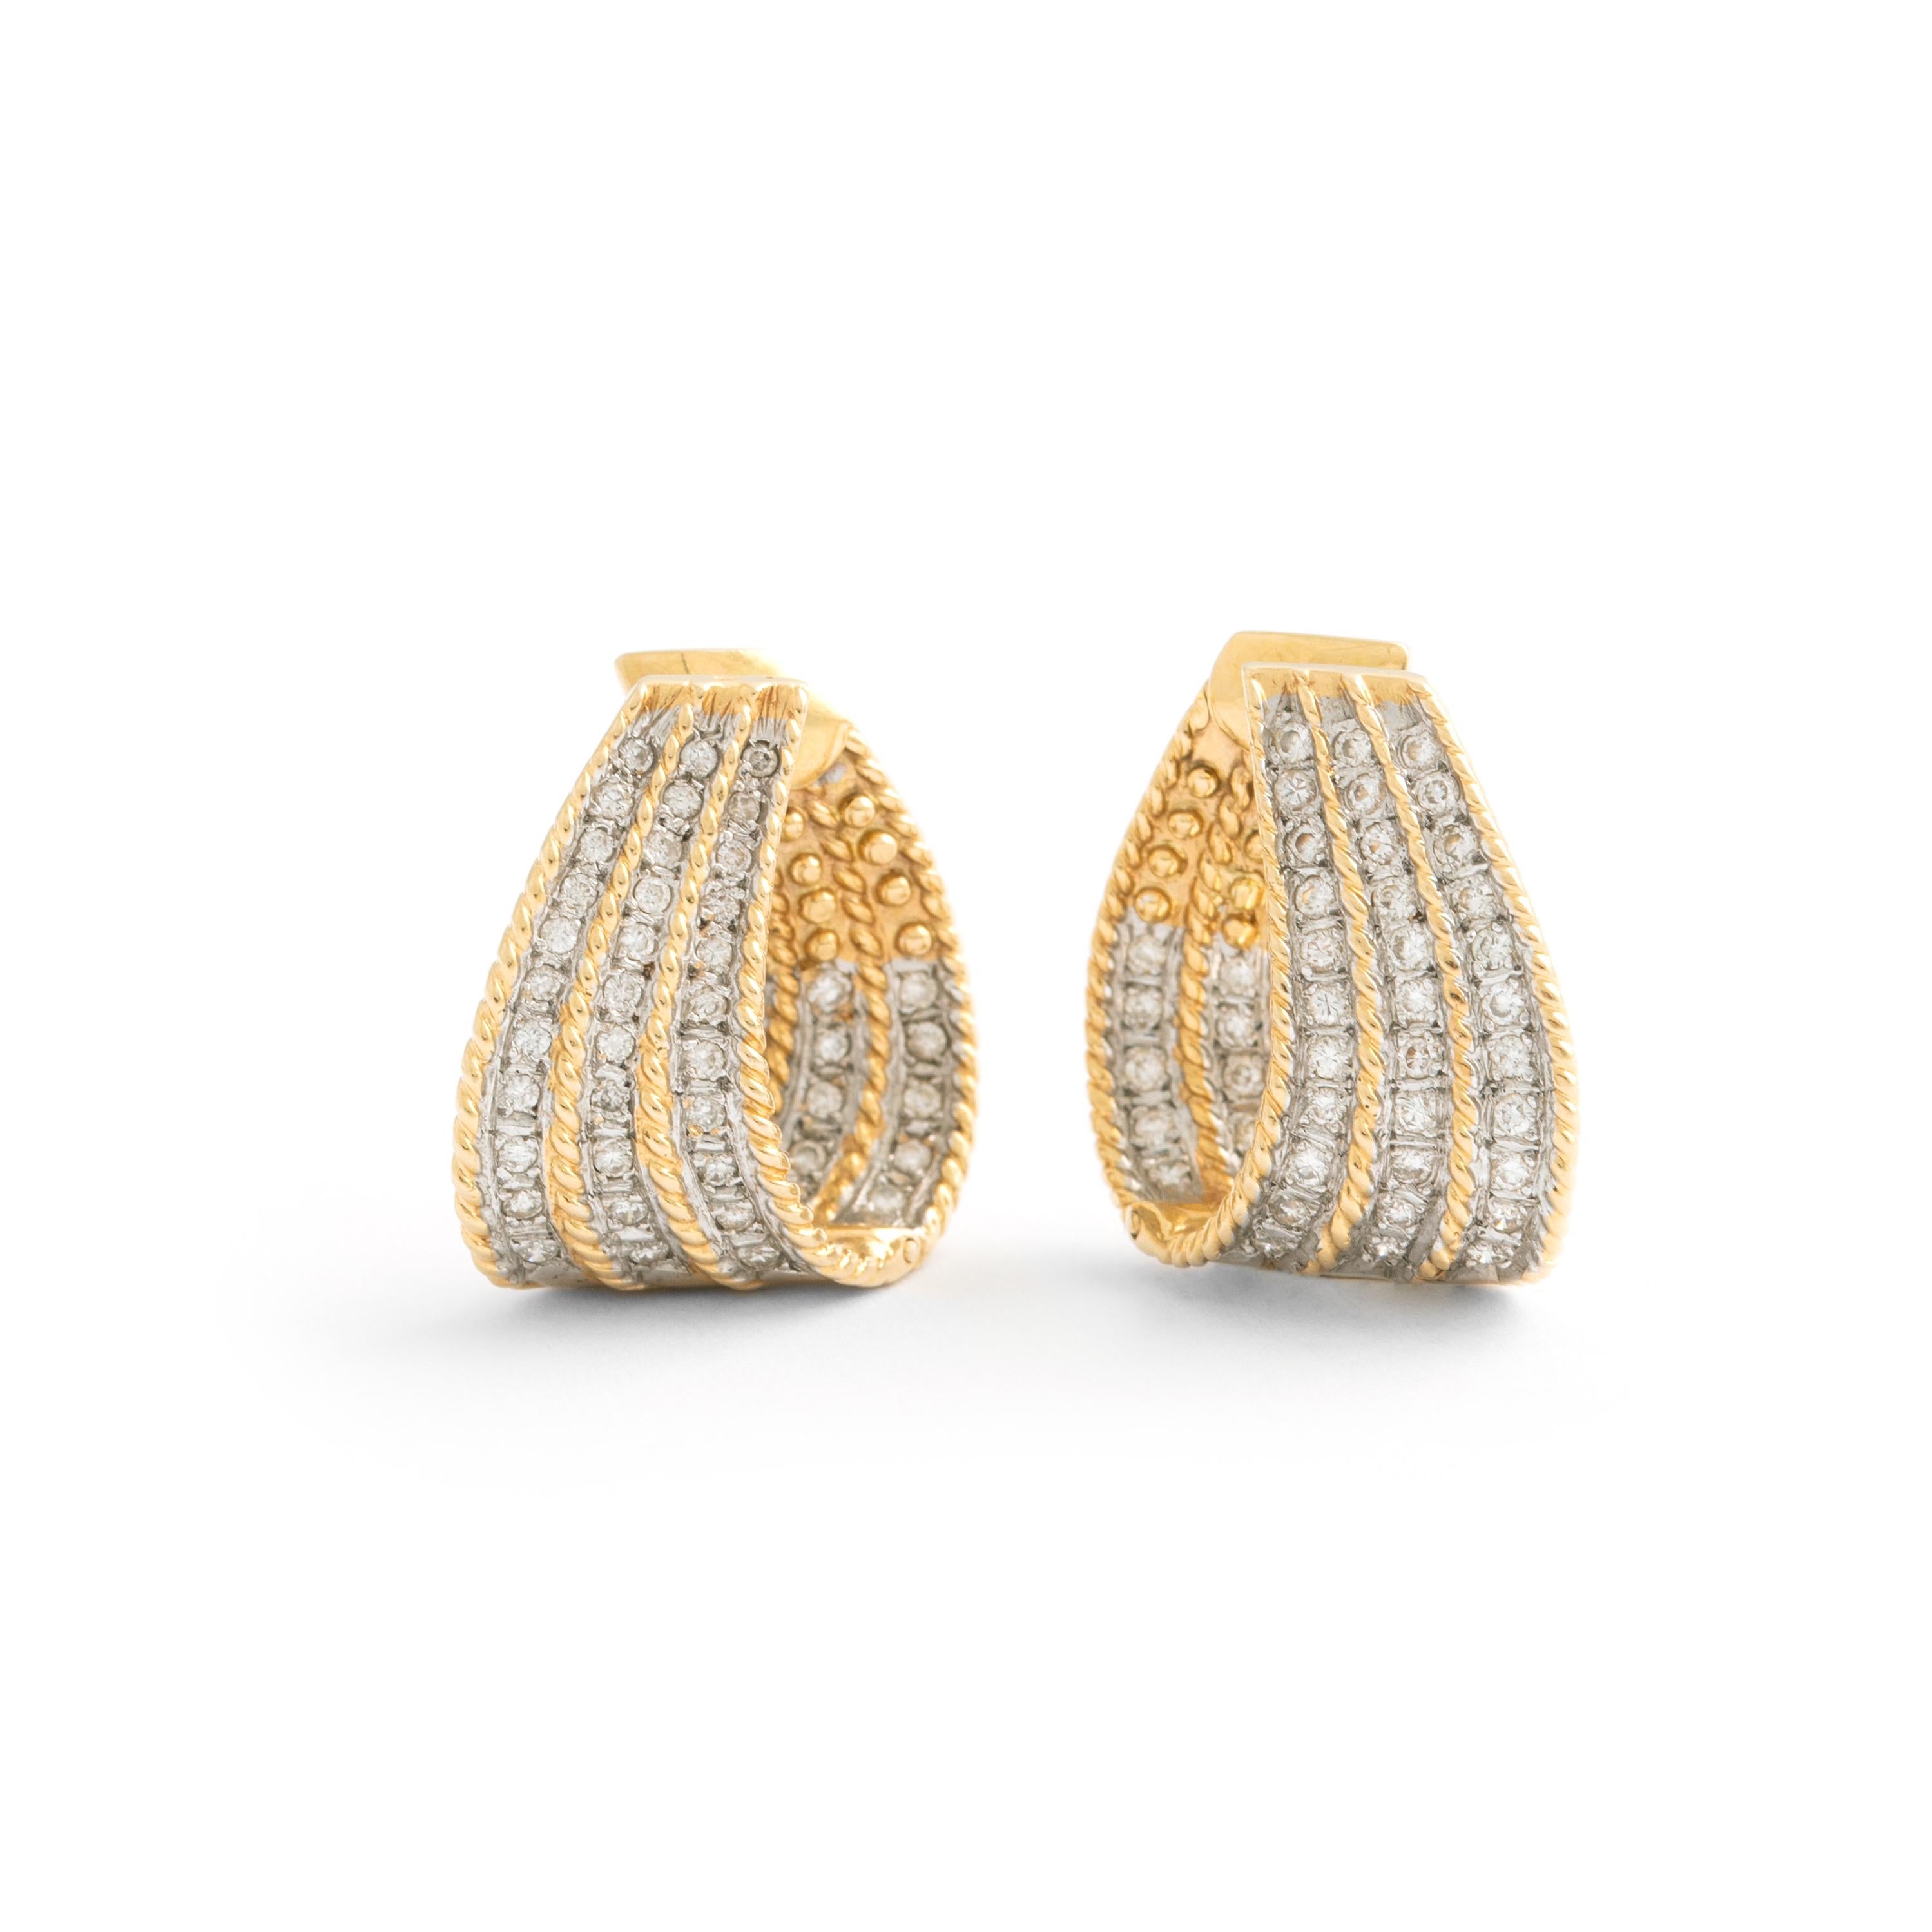 Diamond White and Yellow Gold 18K Earclips.
Gross weight: 10.44 grams.